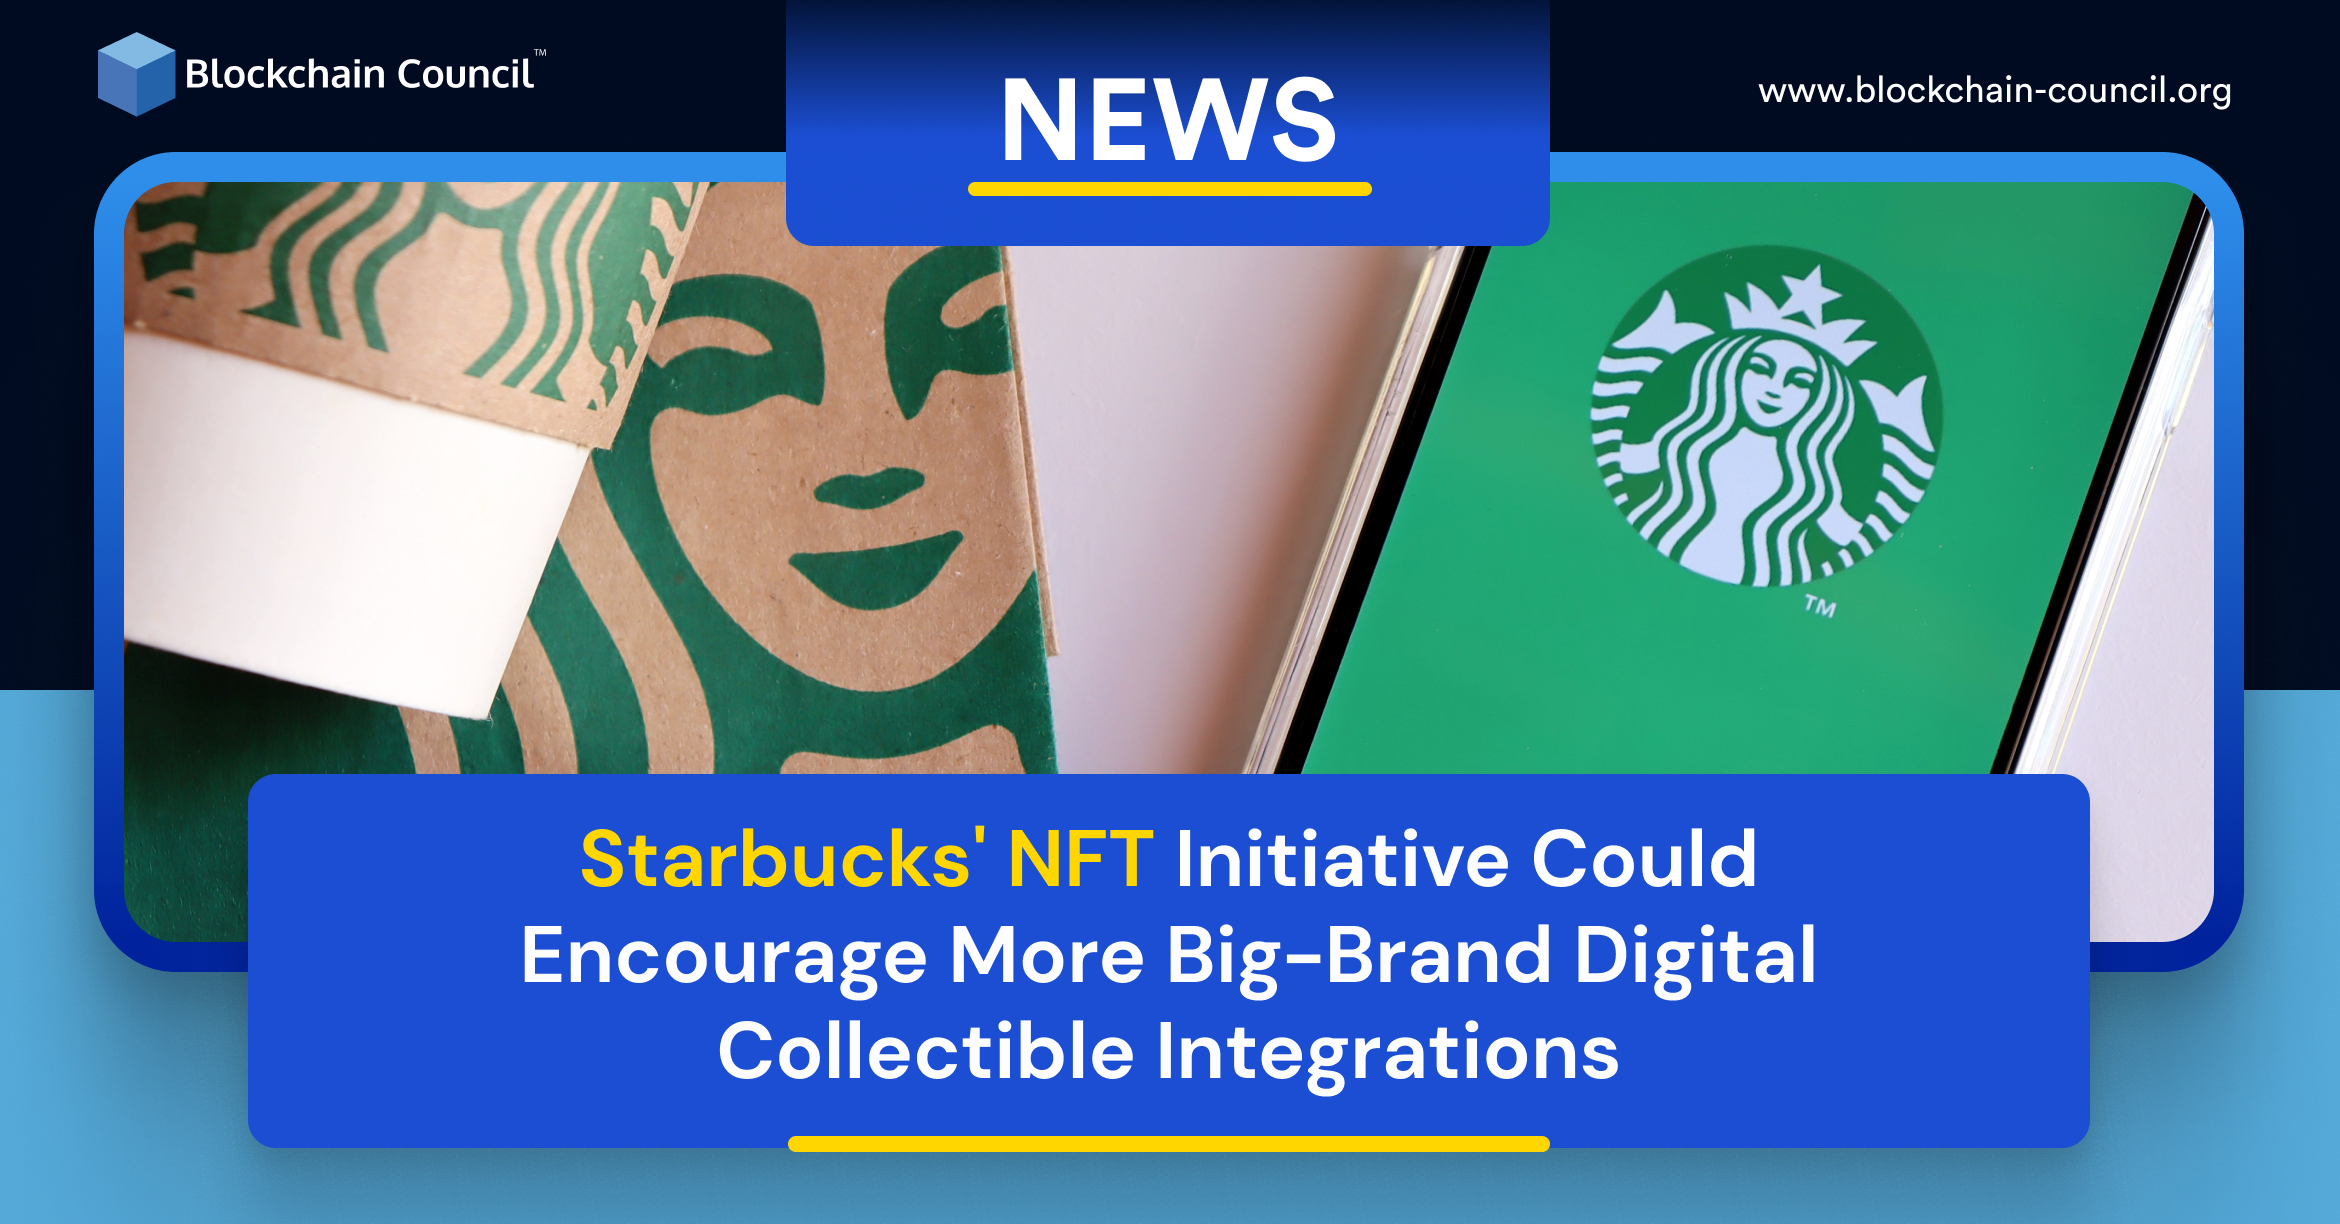 Starbucks' NFT Initiative Could Encourage More Big-Brand Digital Collectible Integrations